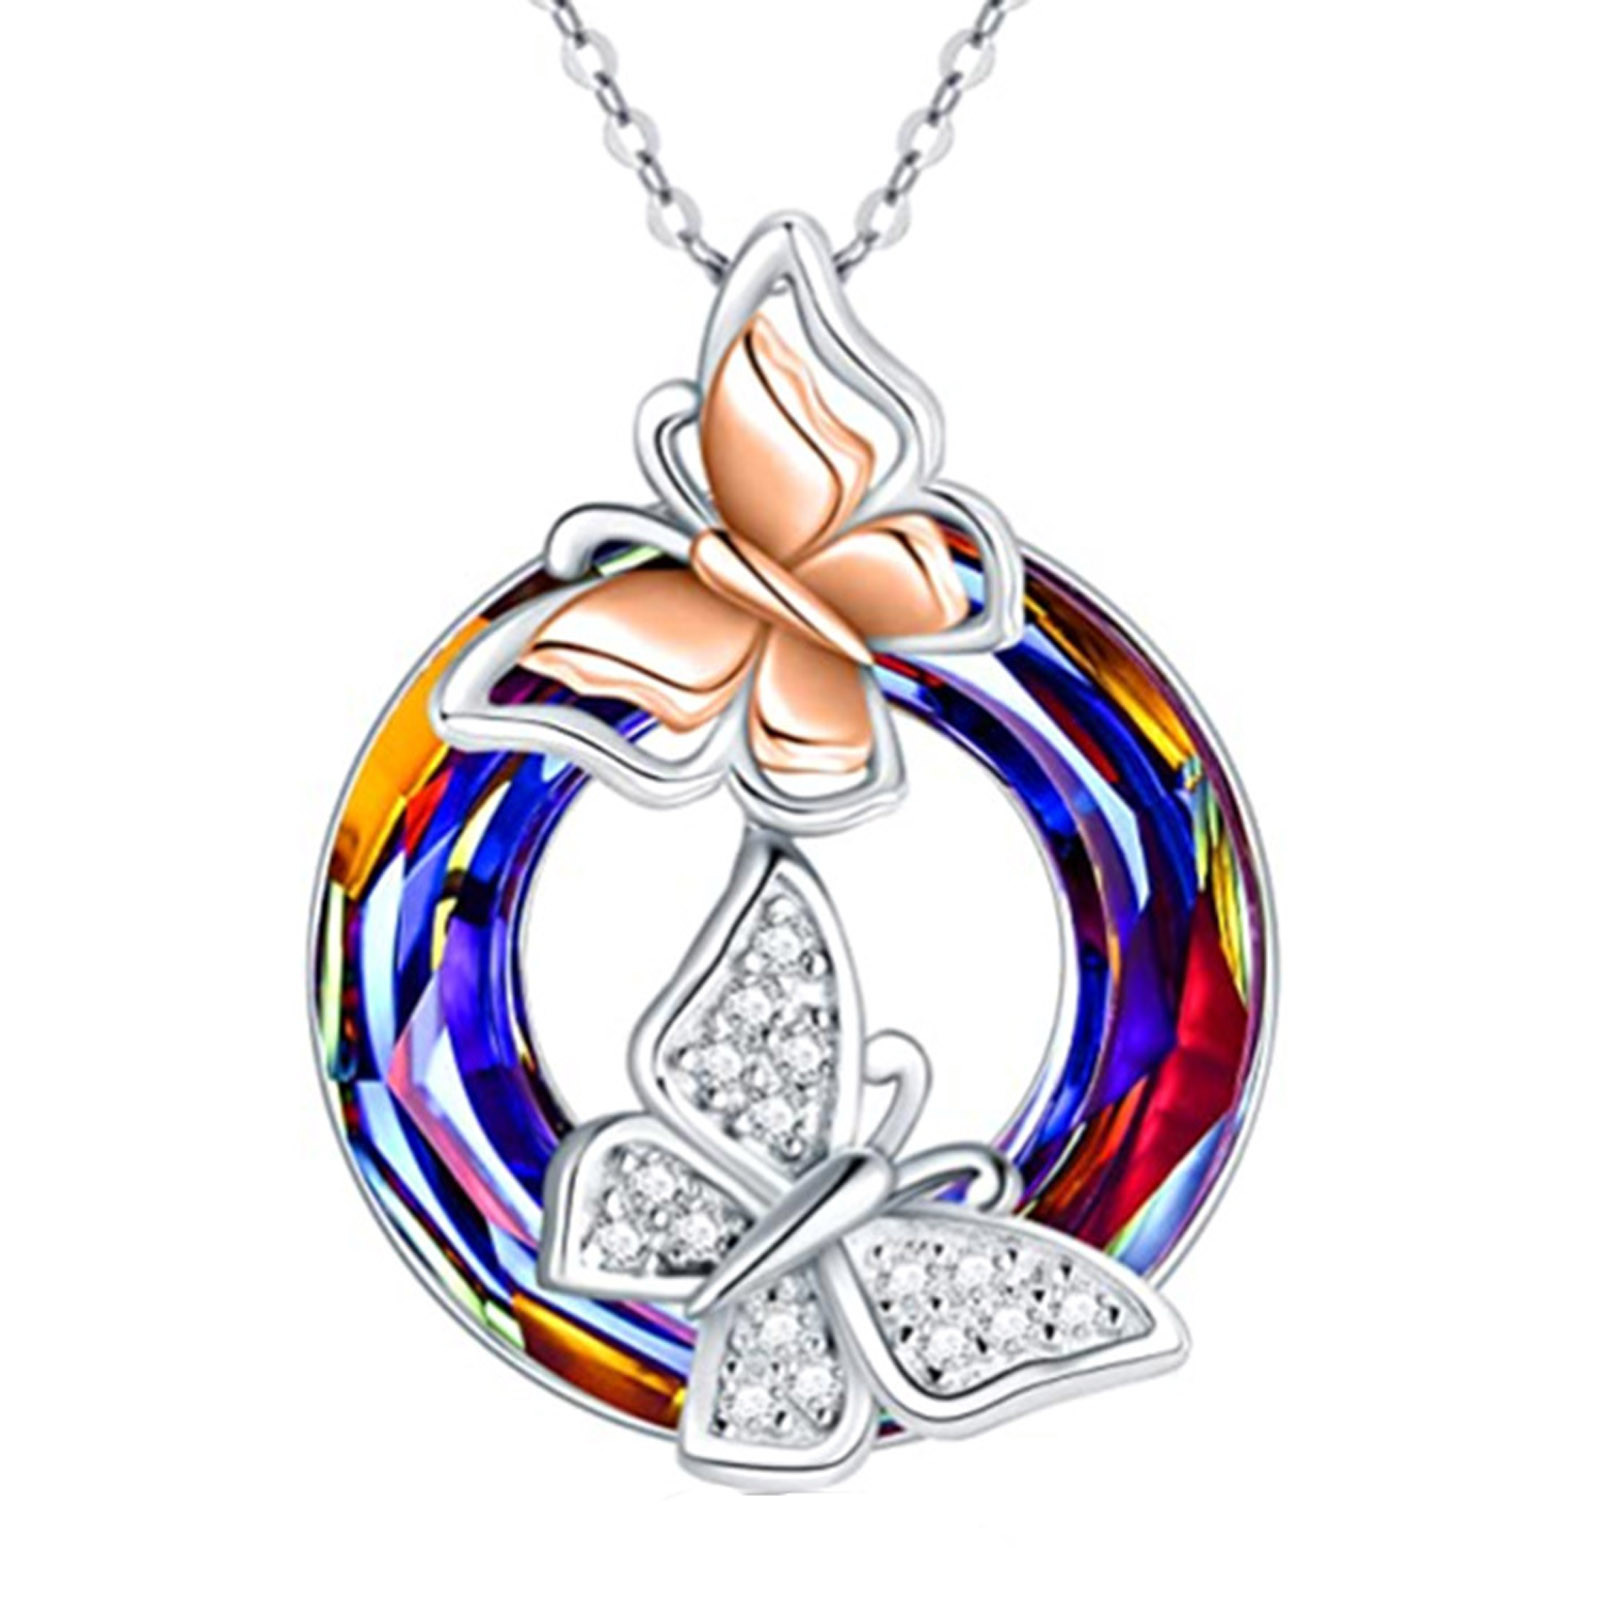 Kayannuo Christmas Clearance Colorful Butterfly Lady Necklace Pendant Round Crystal Necklace All-match Jewelry Accessories - image 1 of 1